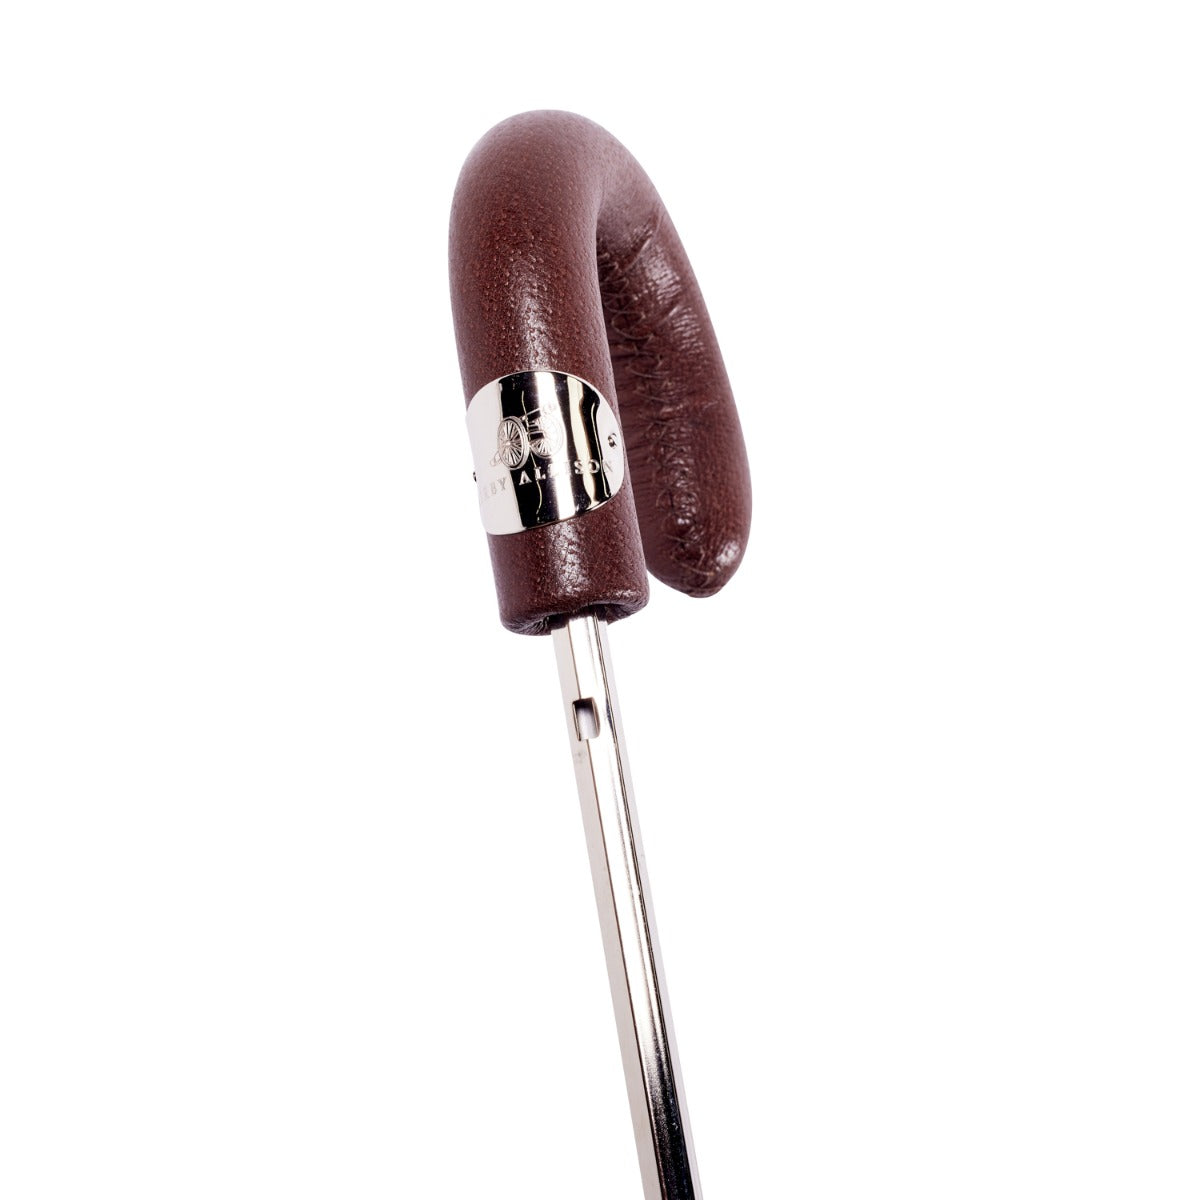 A handcrafted Brown Pigskin Travel Umbrella with Black Canopy cane with a silver handle made by Italian umbrella makers from KirbyAllison.com.